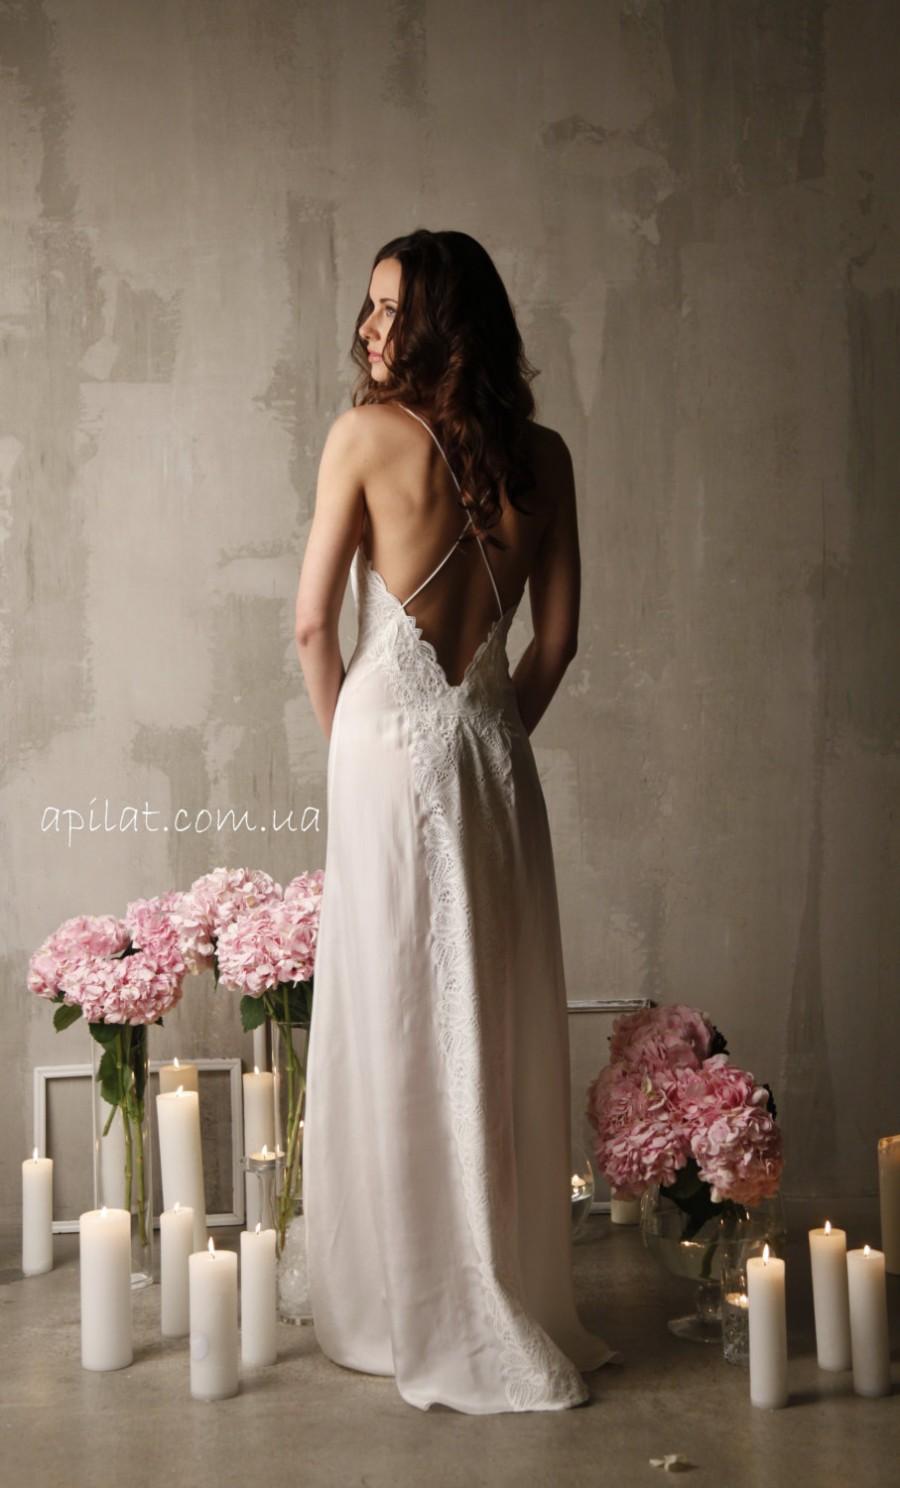 Свадьба - Long Silk Bridal Nightgown With Open Back and Lace F12(Lingerie, Nightdress), Bridal Lingerie, Wedding Lingerie, Honeymoon, Christmas Gifts